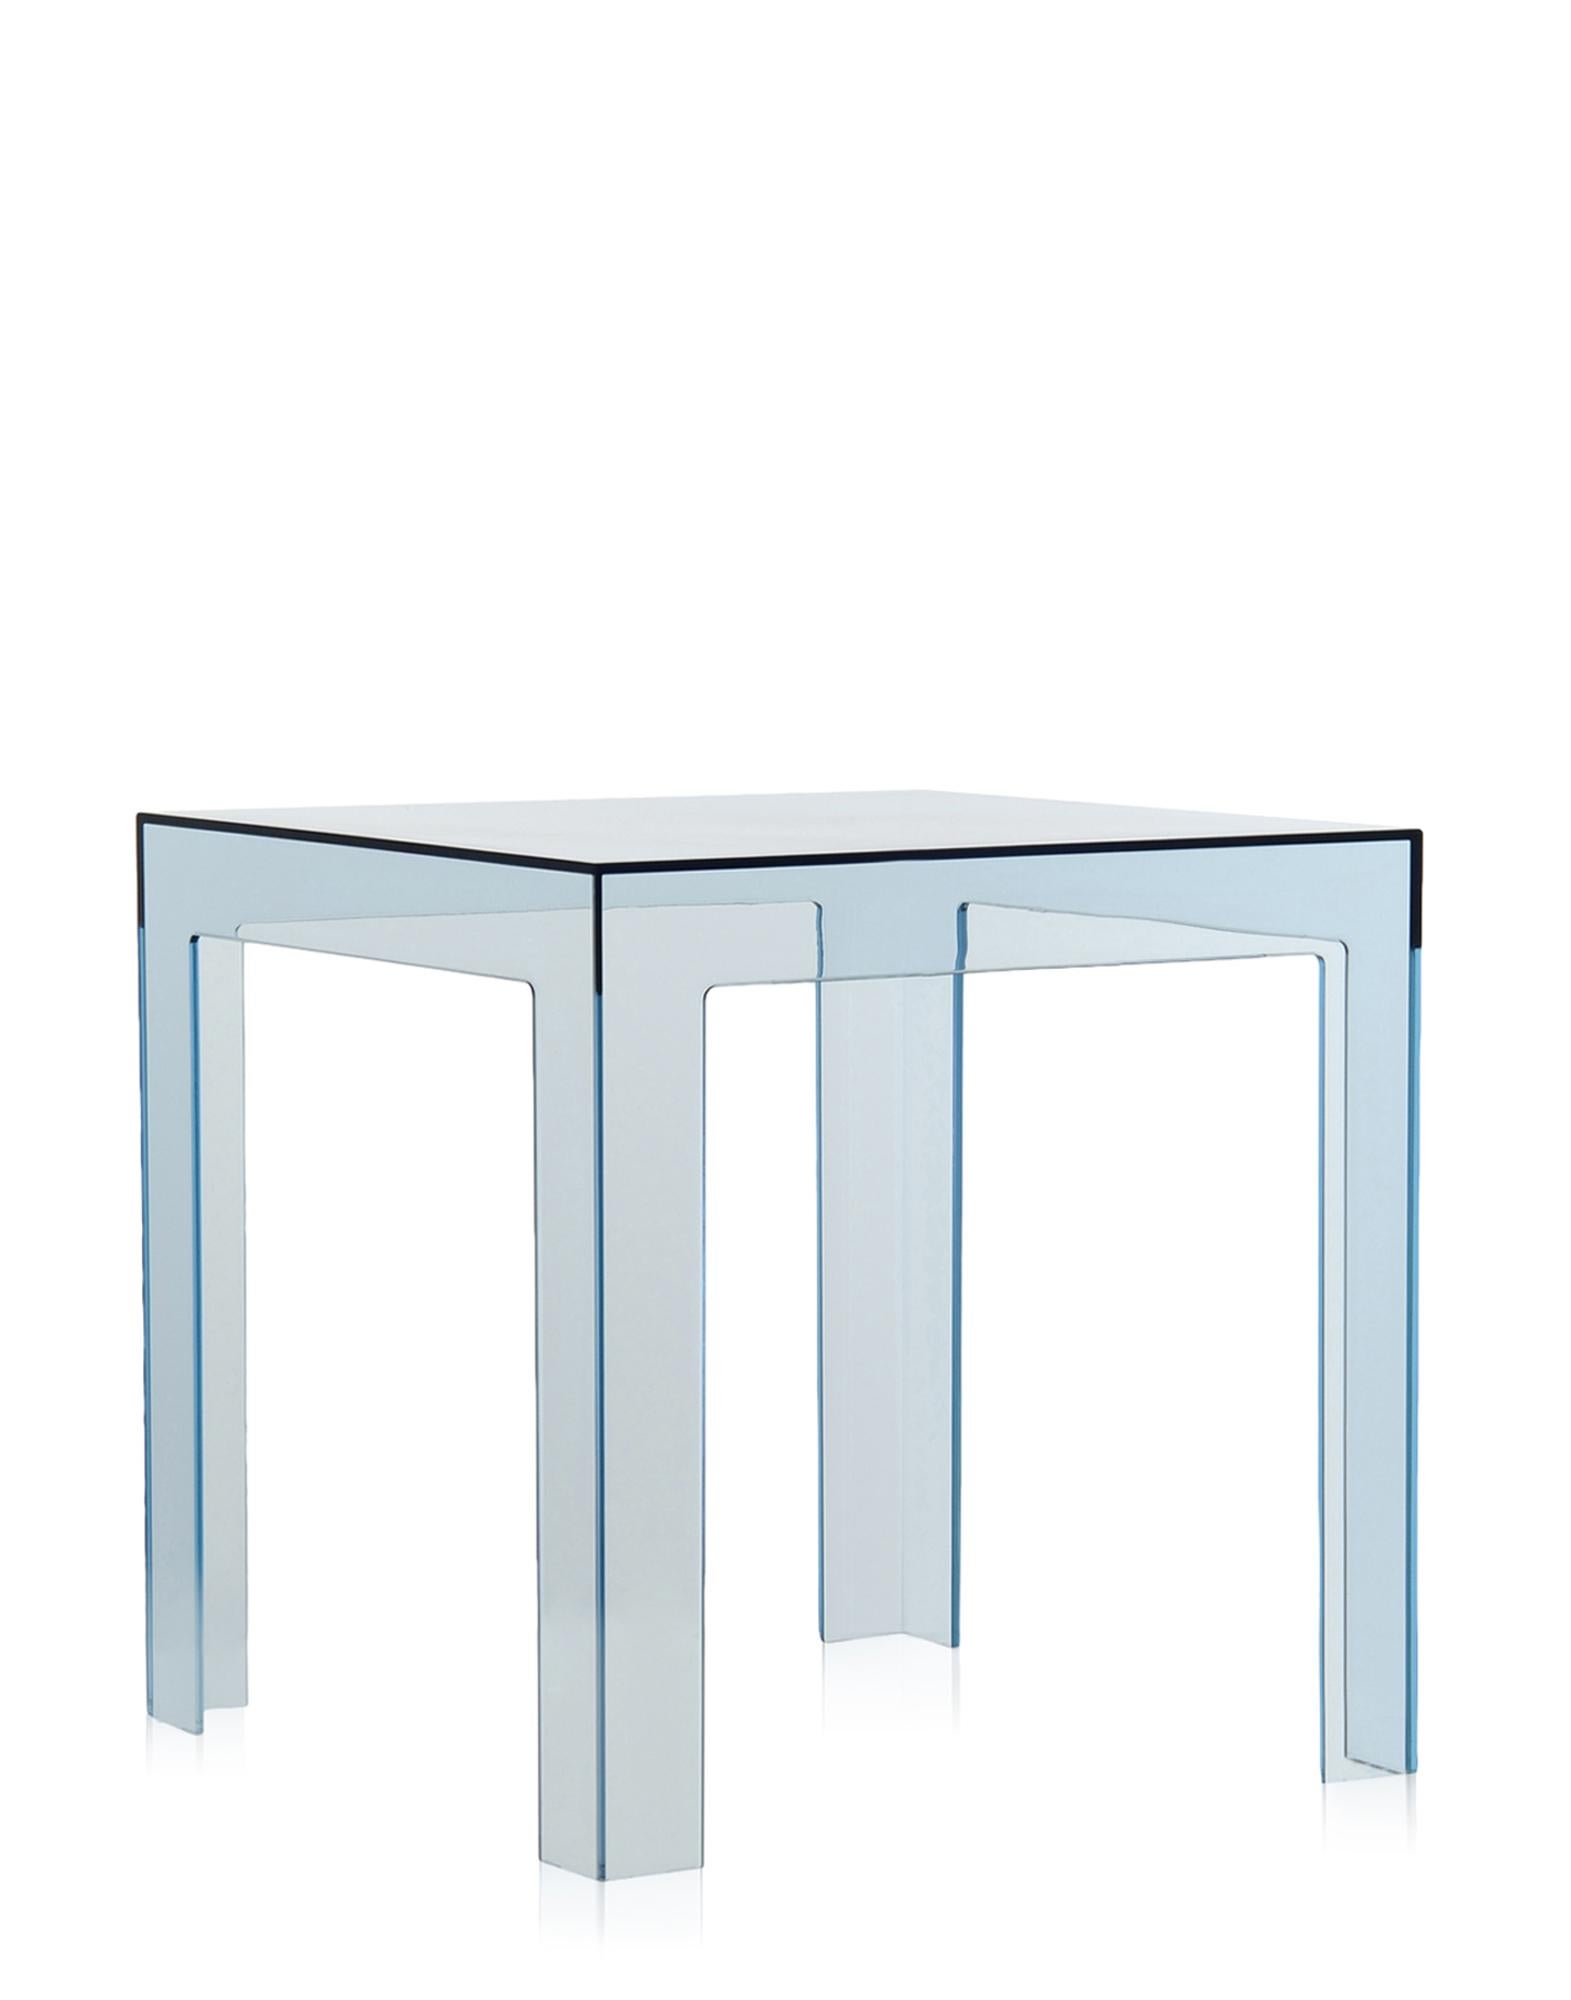 A completely transparent small side table in the perfect size: 40 x 40 x 40 cm. Colourful, practical, safe and functional, Jolly is a versatile and fun side table made of transparent or batch-dyed polycarbonate and it is shock resistant and